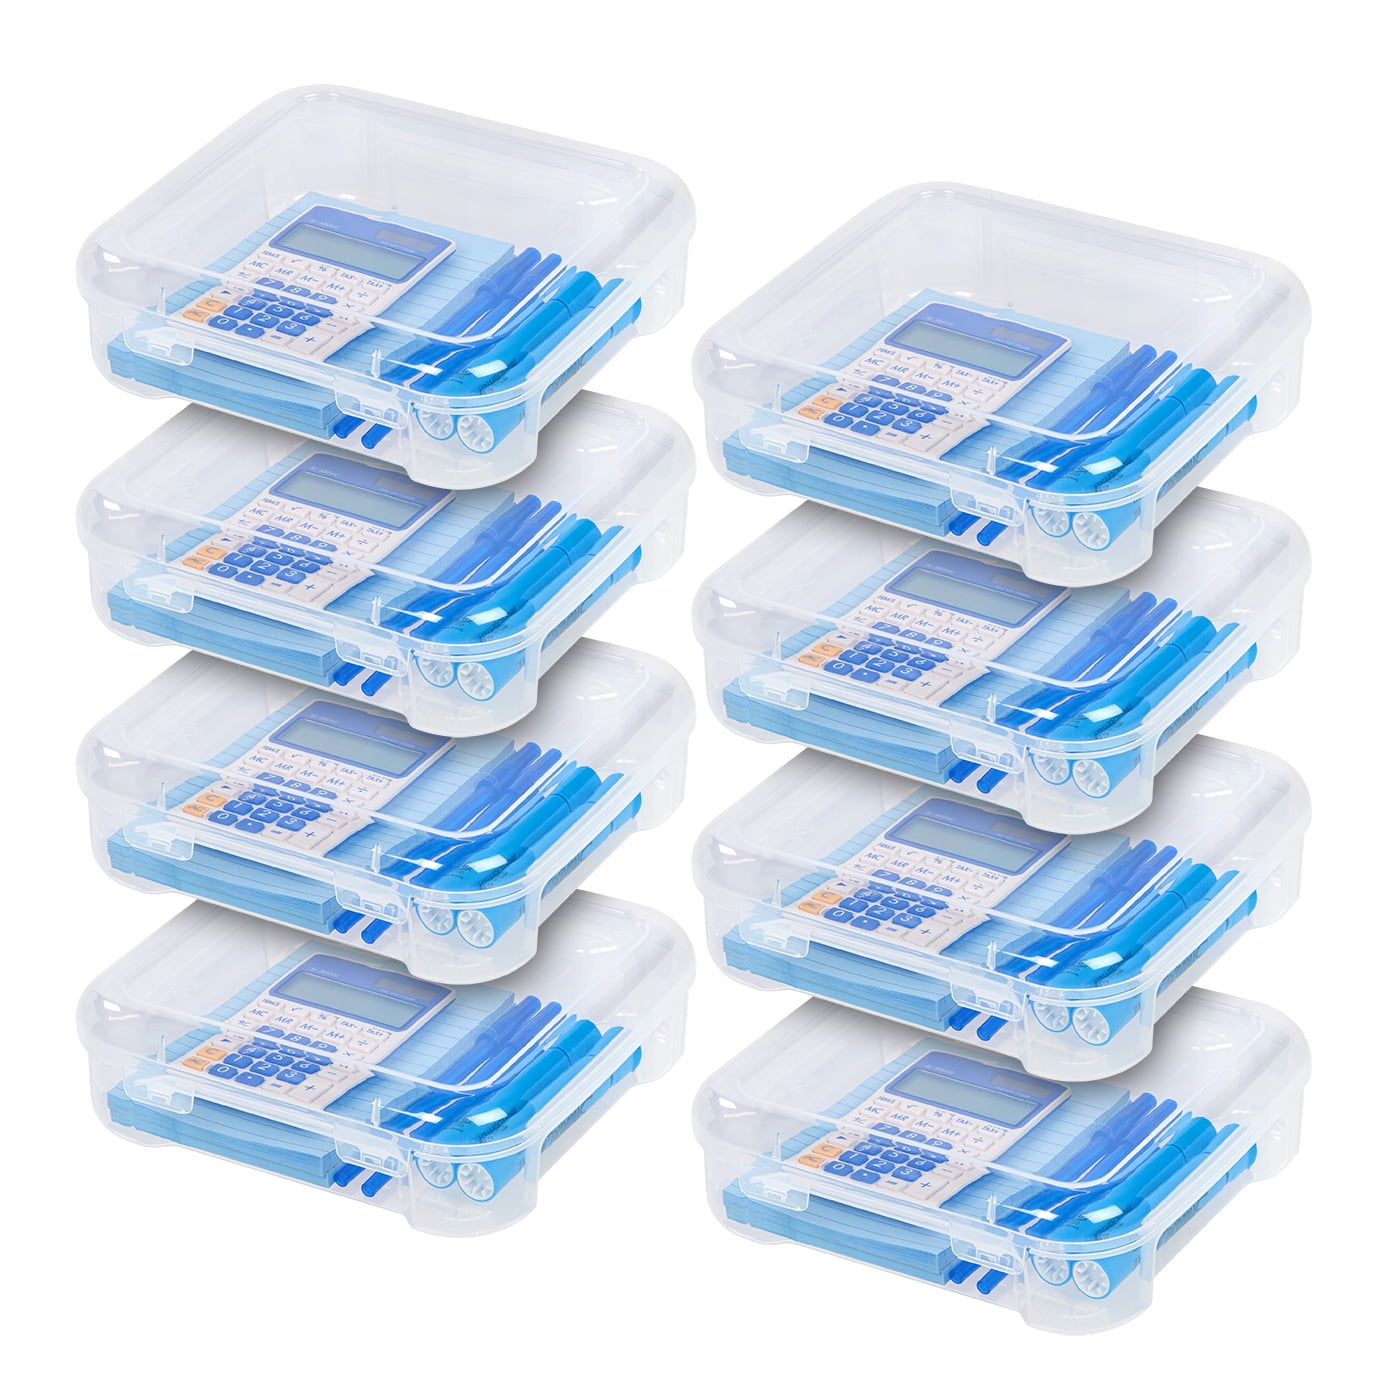 Iris USA Portable Project Case, 6 Pack, Clear